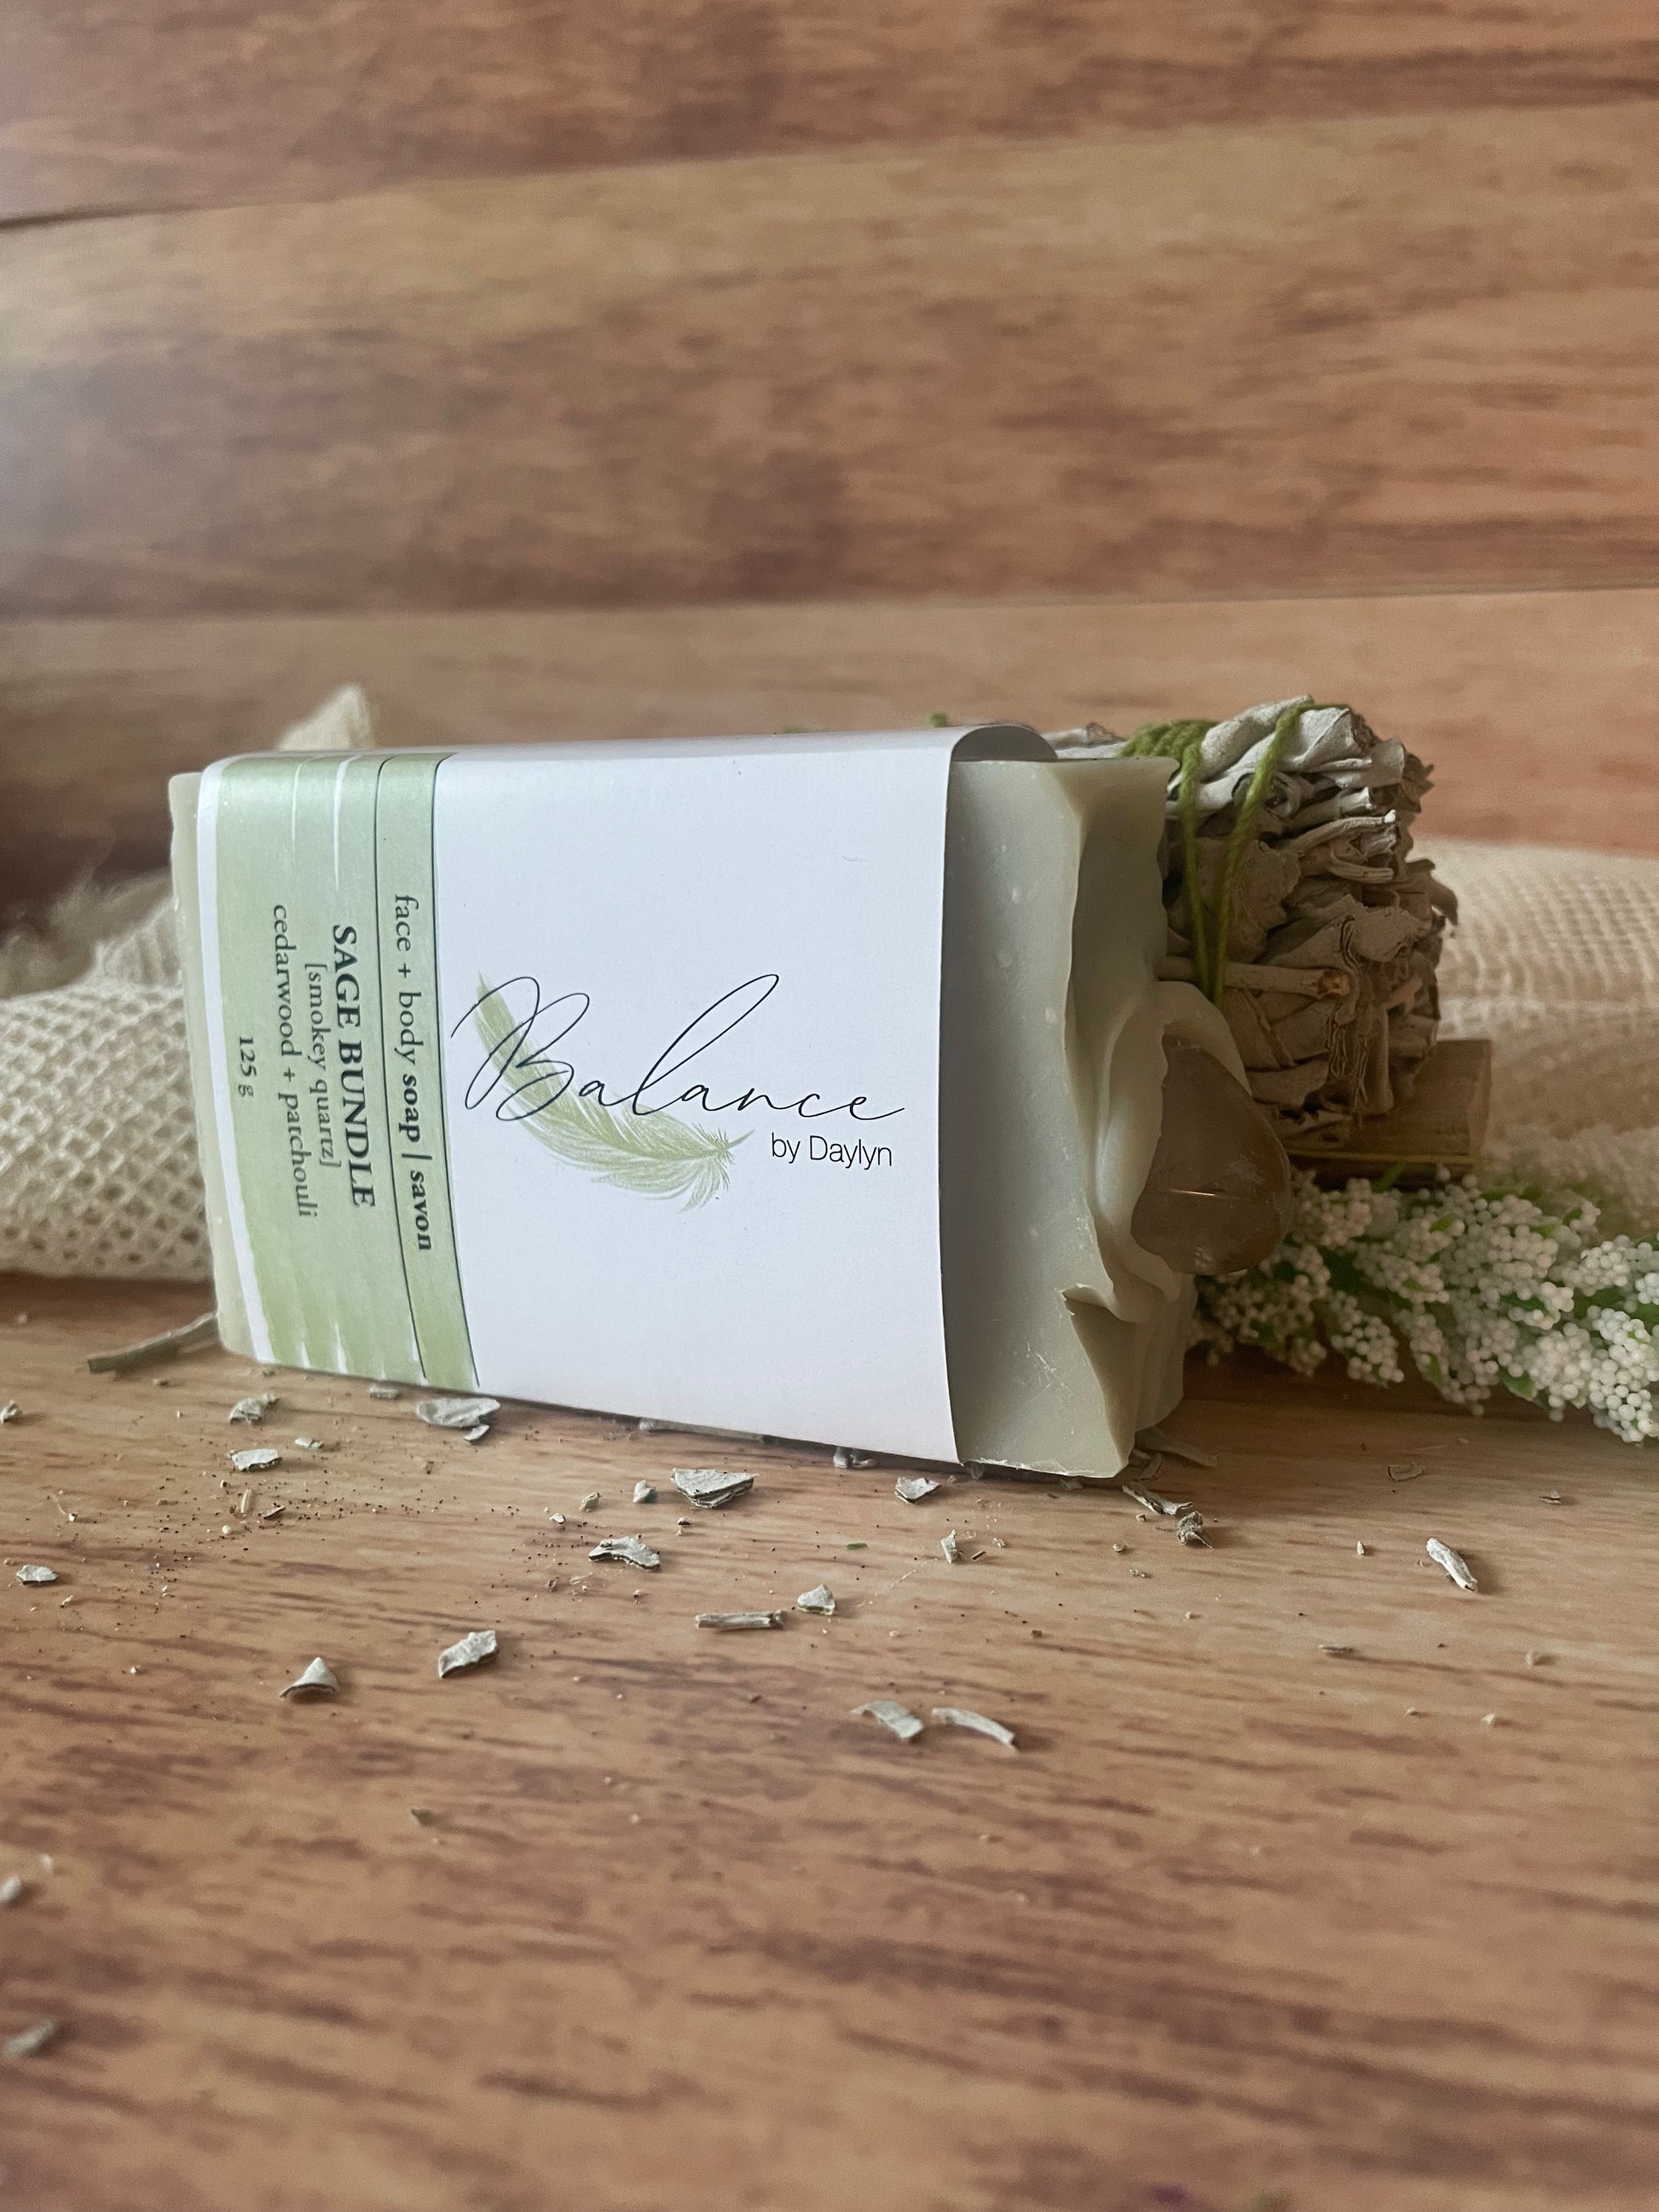 bar soap on sale, newmarket dayly, sage bundle made for face and body